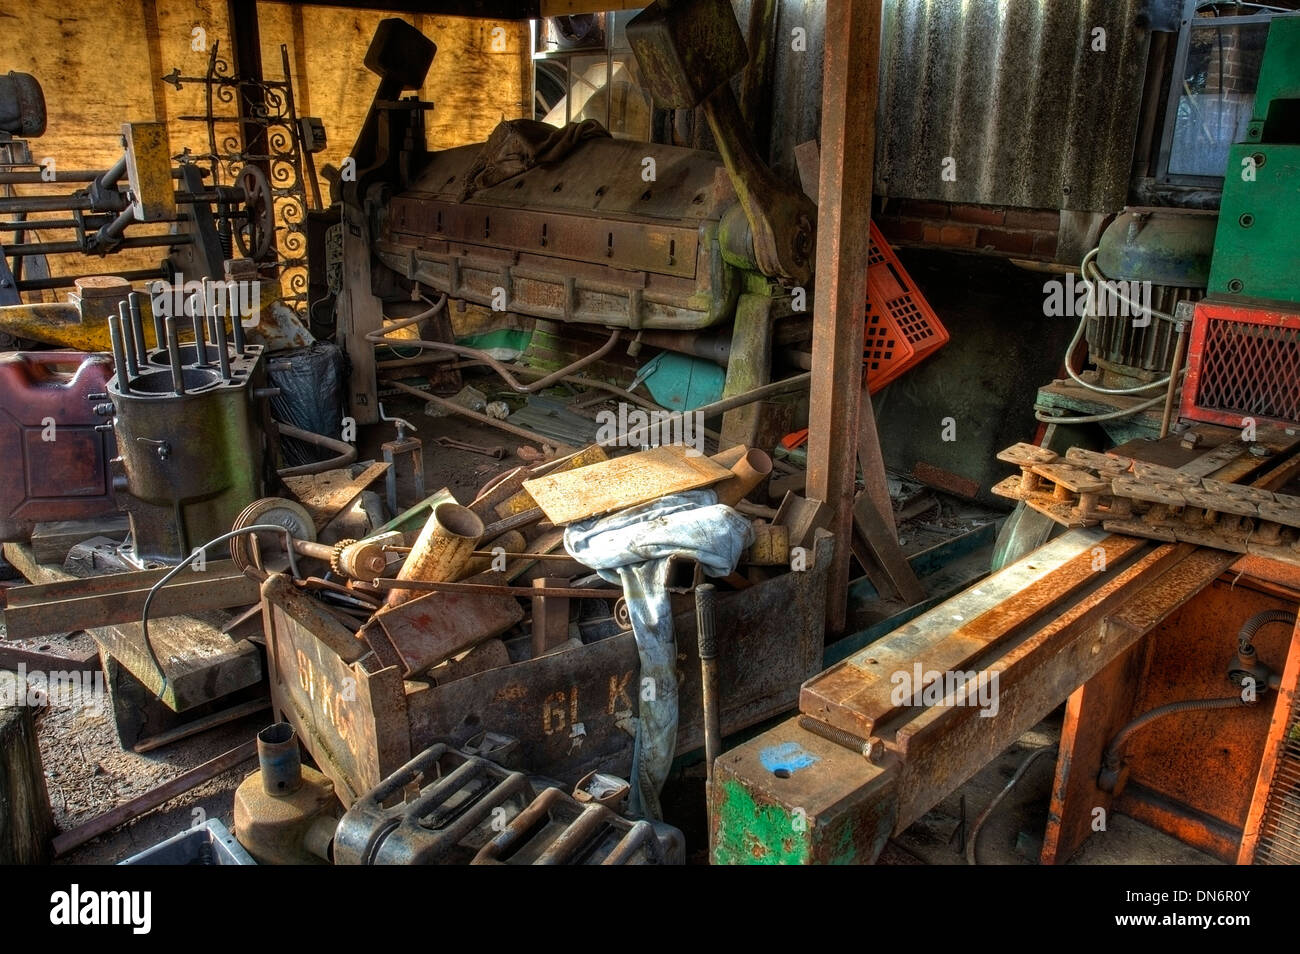 Machines au rebut, Worcestershire, Angleterre. Banque D'Images